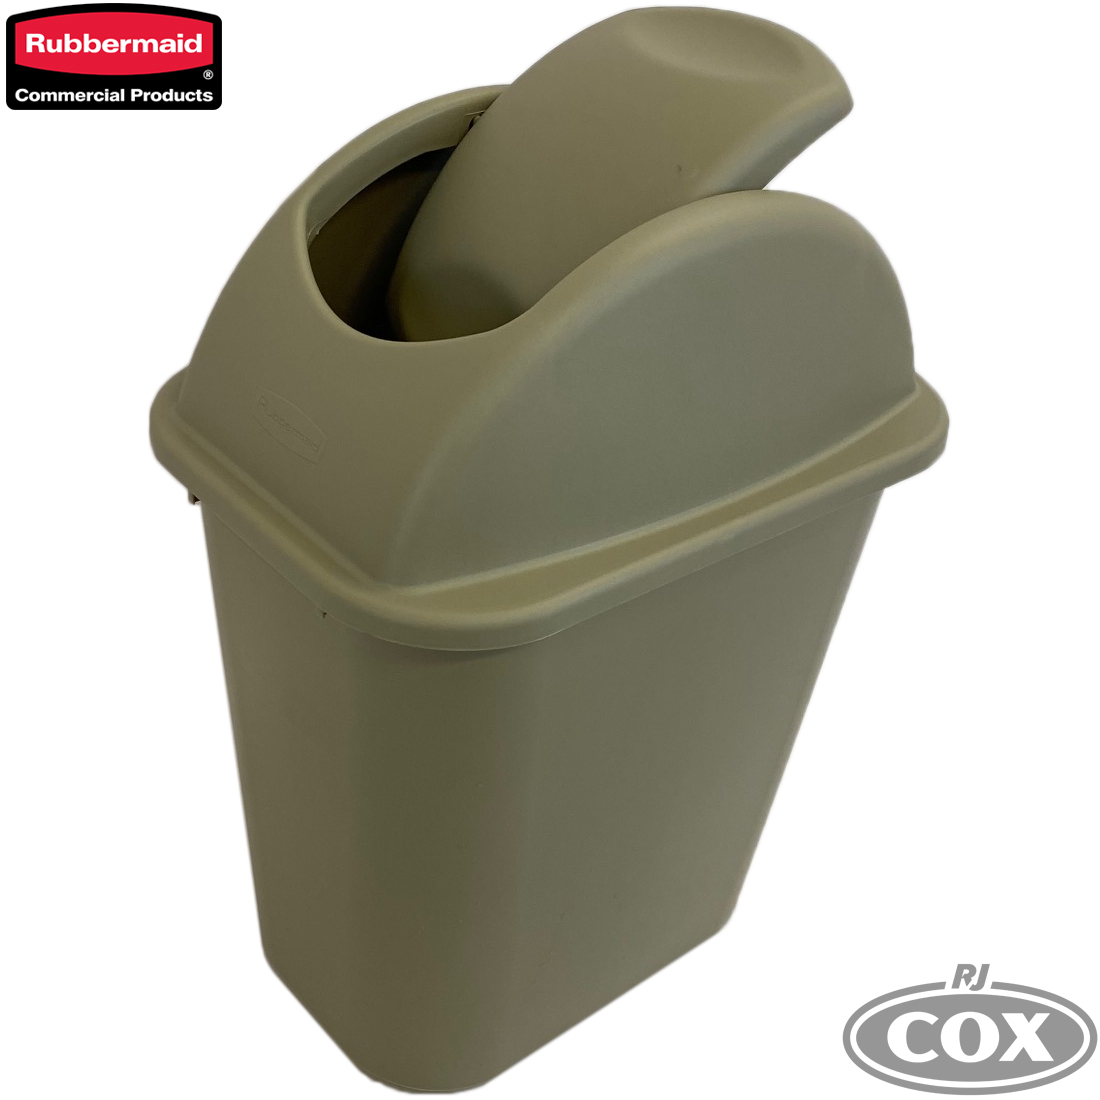 26.6L Untouchable Swing Top Waste Bin - FG2956 with FG3066